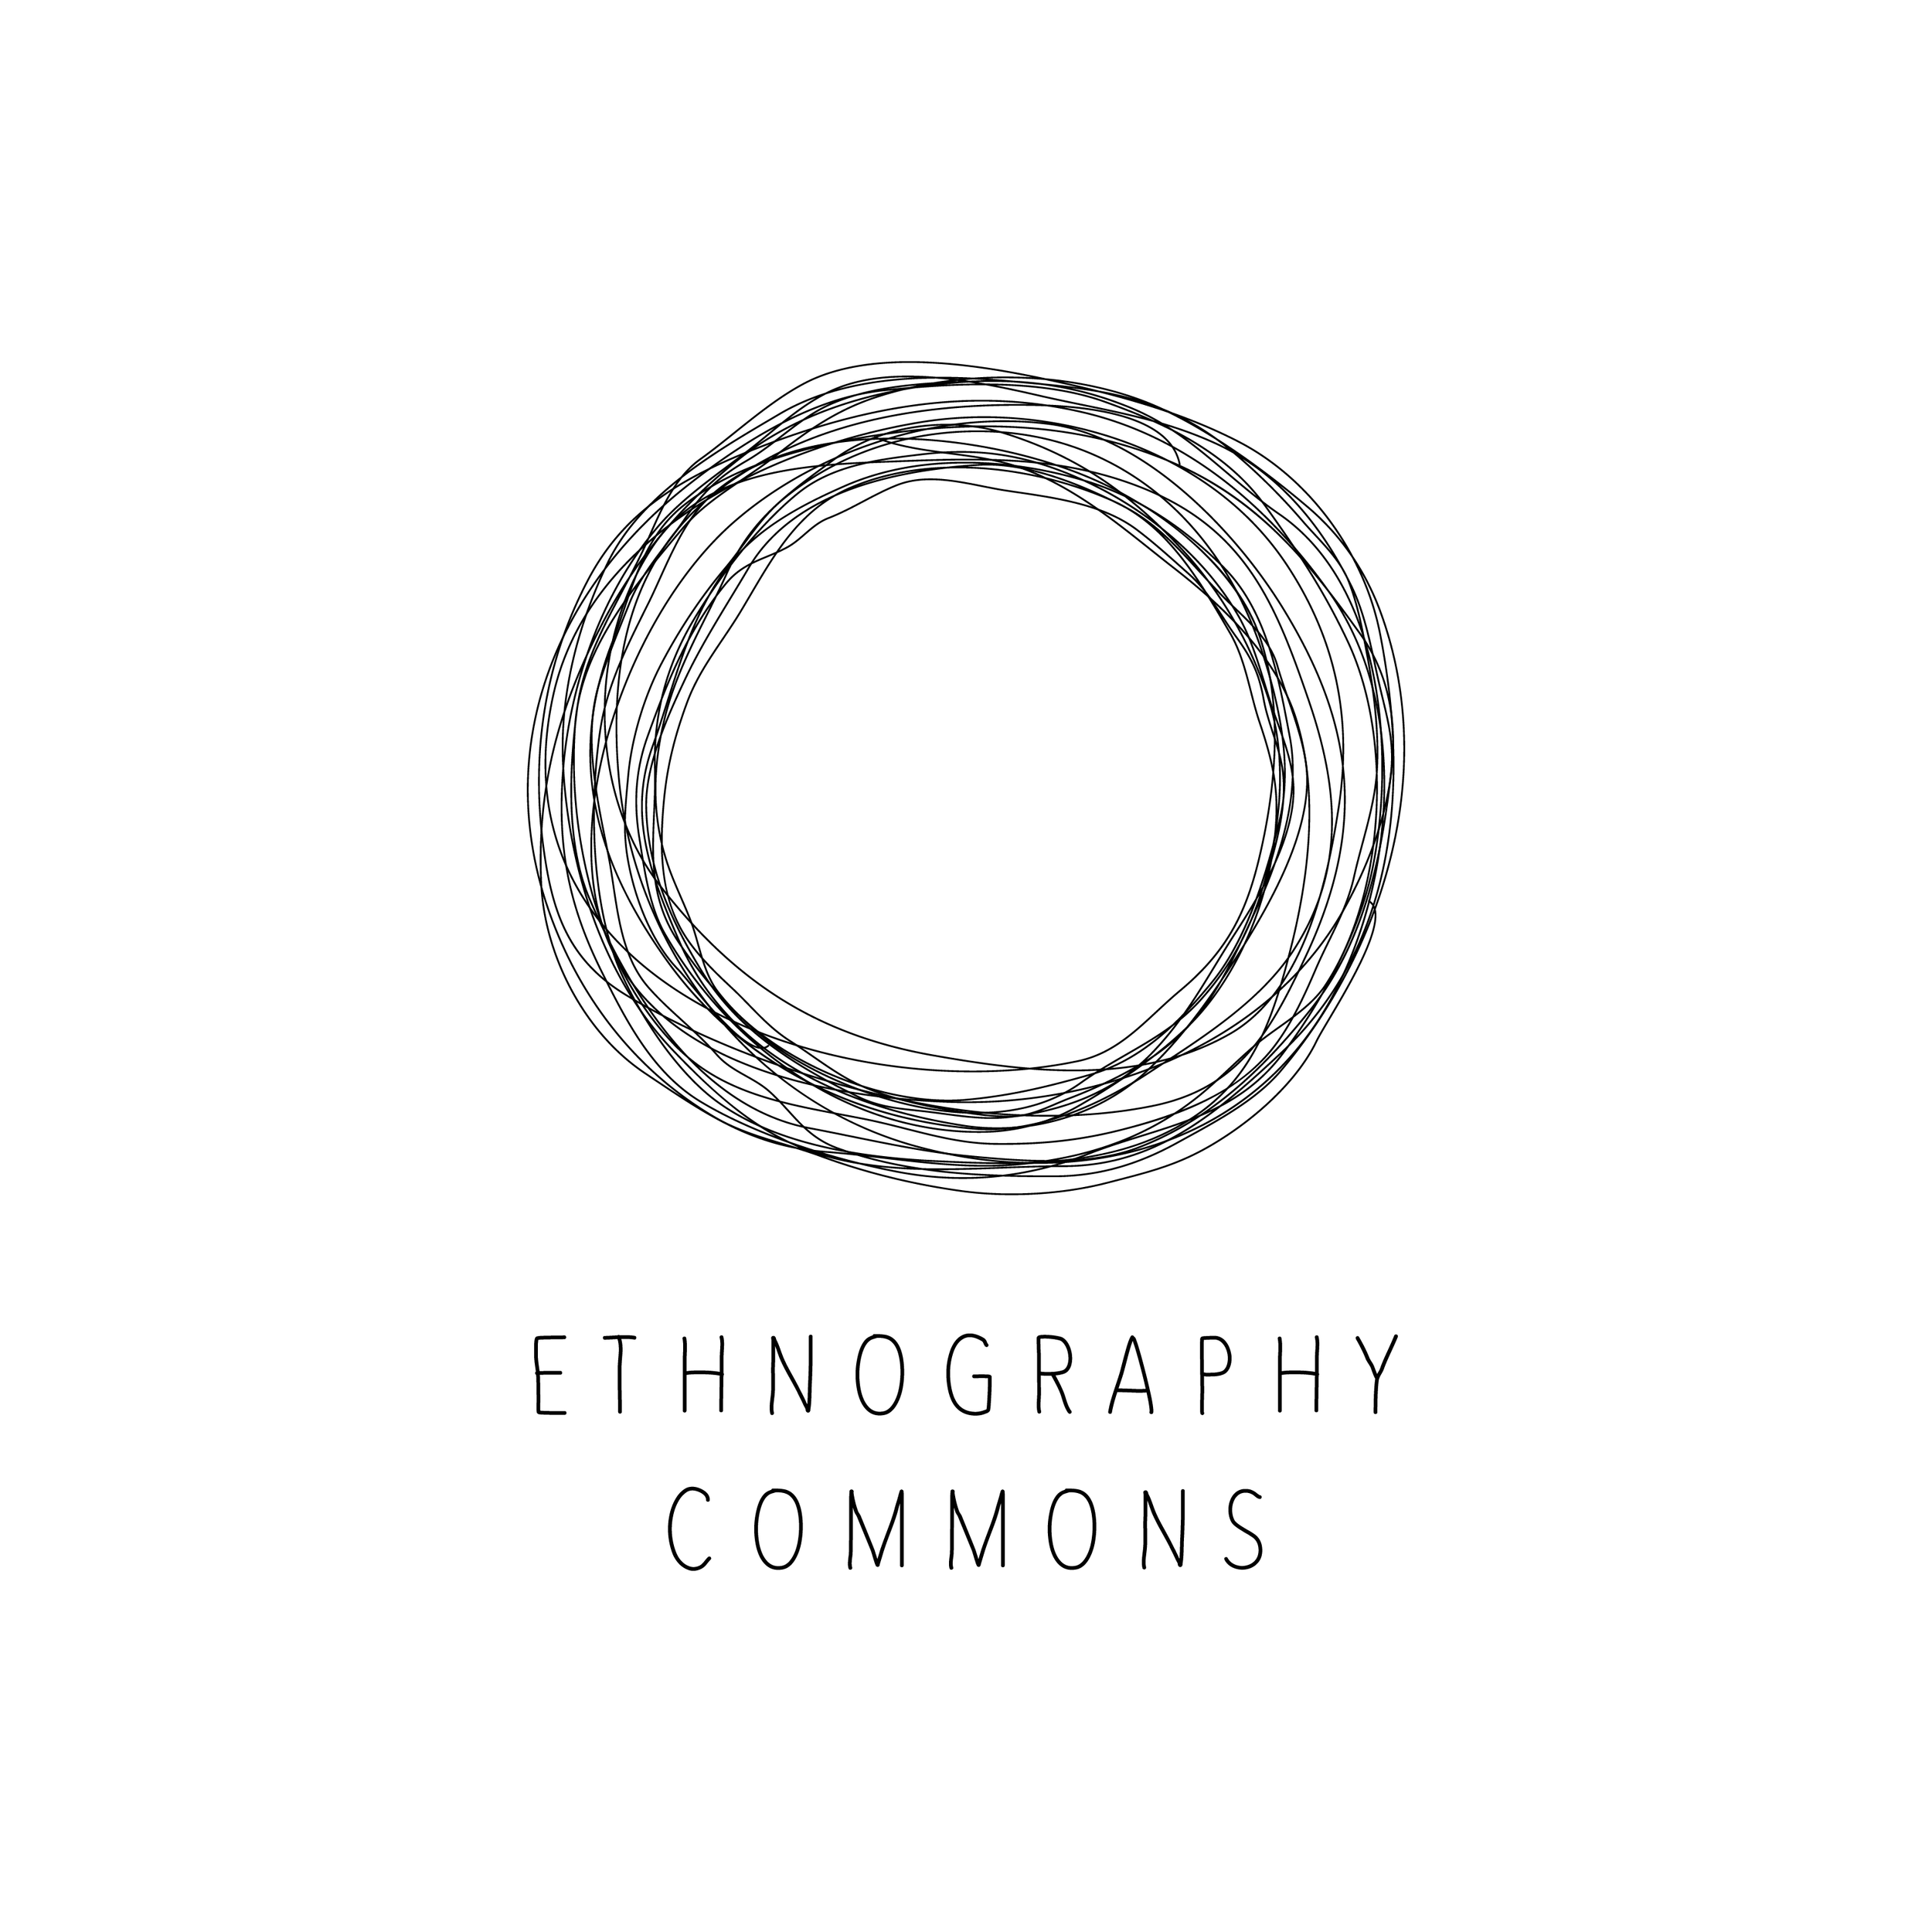 Ethnography Commons